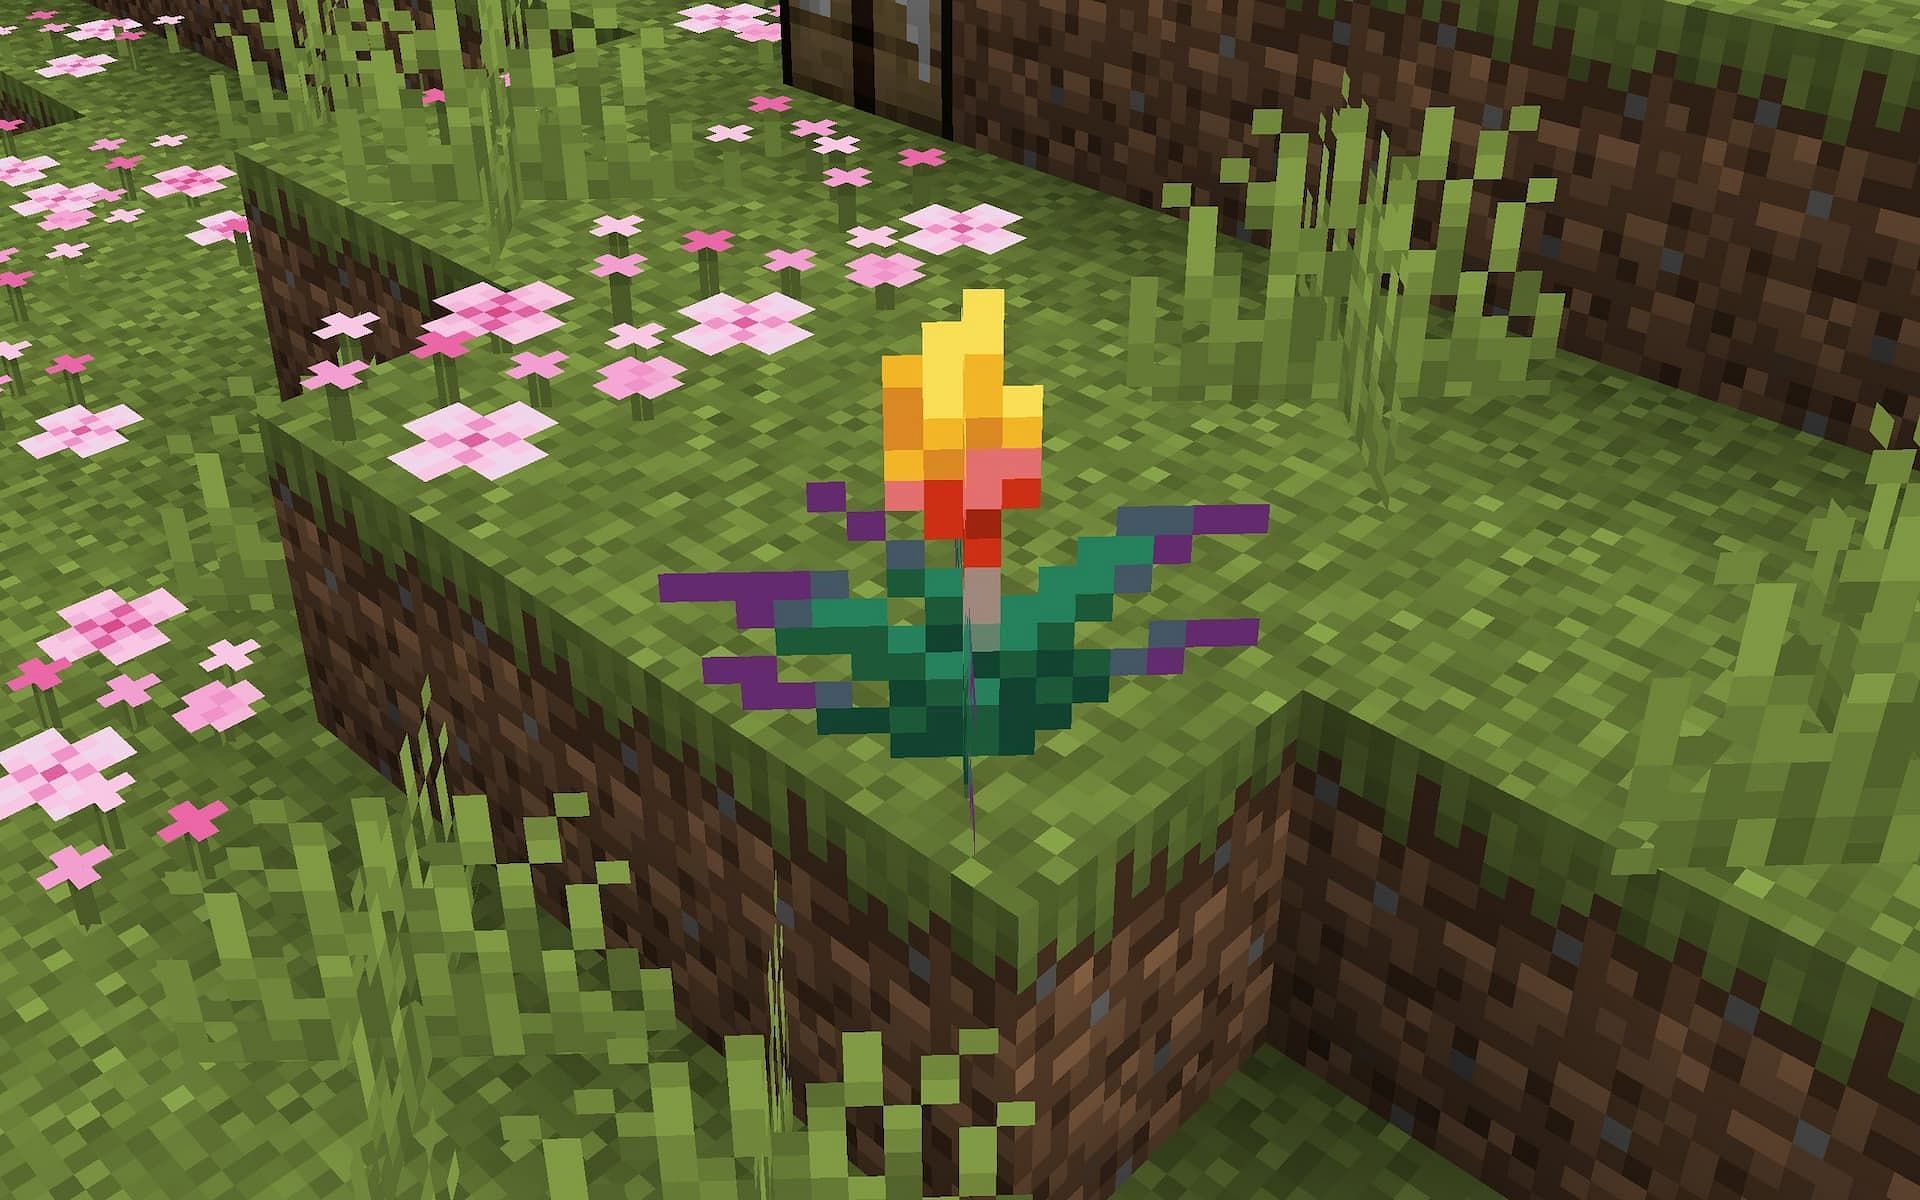 Sniffers love to dig up torchflower seeds (Image via Mojang)